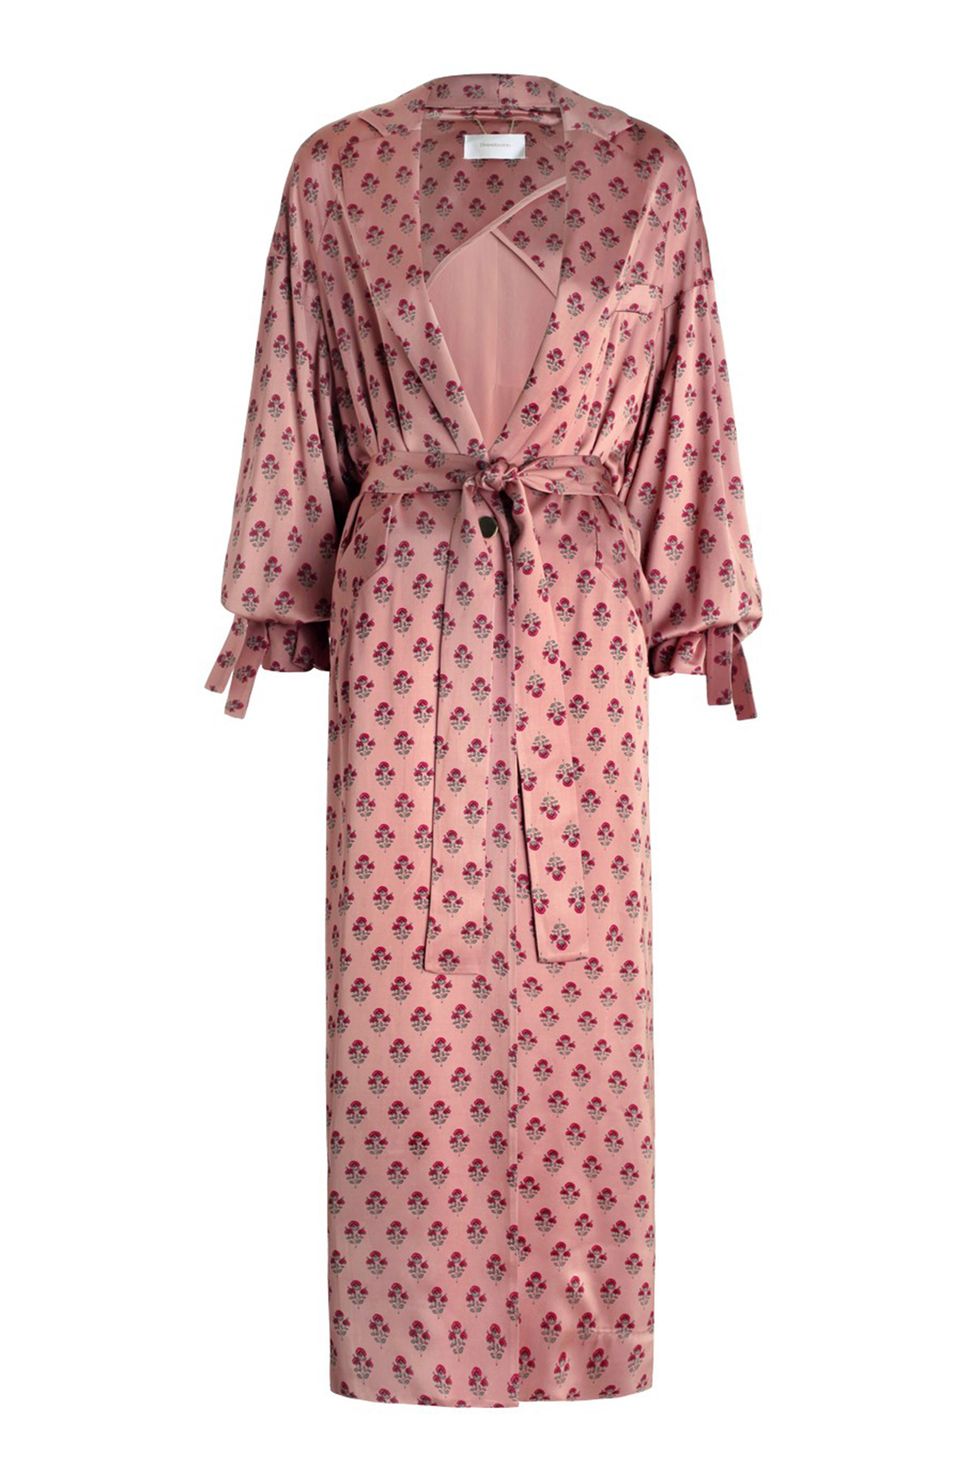 <p>
Zimmermann Karmic Stamp Trench, $960; <a href="https://us.zimmermannwear.com/readytowear/clothing/jackets-coats/karmic-stamp-trench-stamp-floral.html">zimmermannwear.com</a></p><p><span class="redactor-invisible-space" data-verified="redactor" data-redactor-tag="span" data-redactor-class="redactor-invisible-space"></span></p>